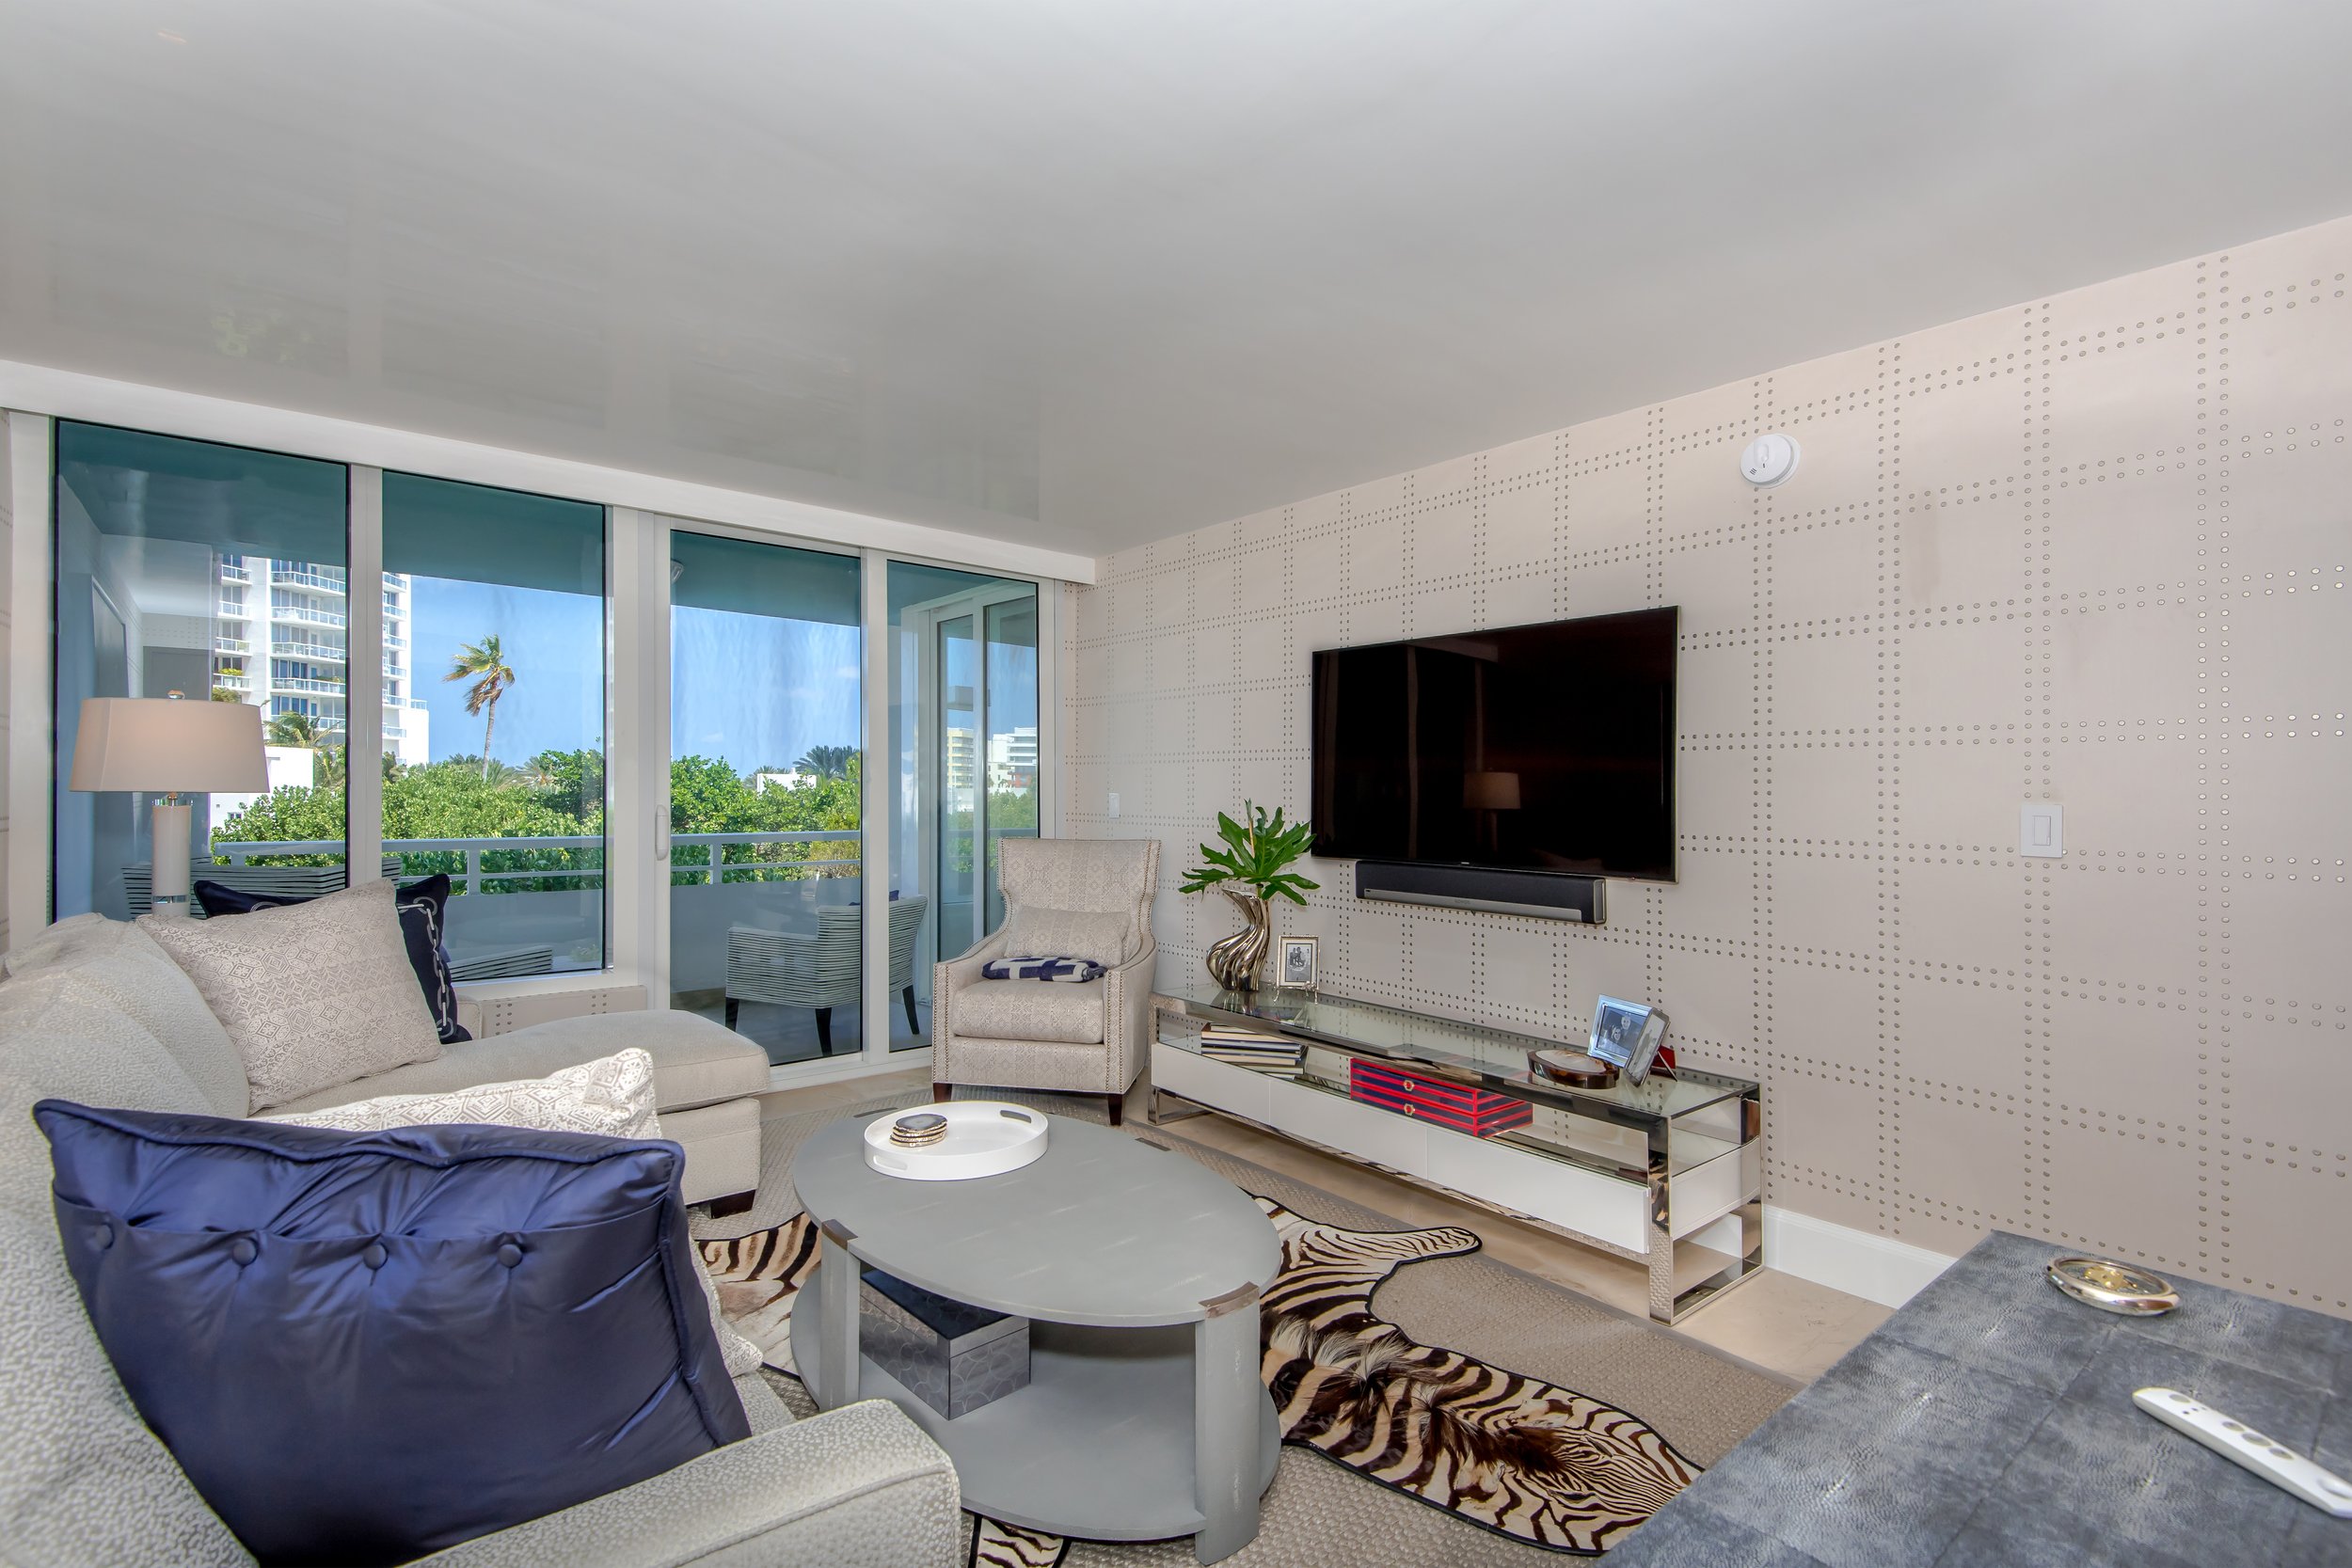 Master Brokers Forum Listing: Check Out This South Beach Corner Unit In South Pointe Tower Asking $2.75 Million 23.jpg